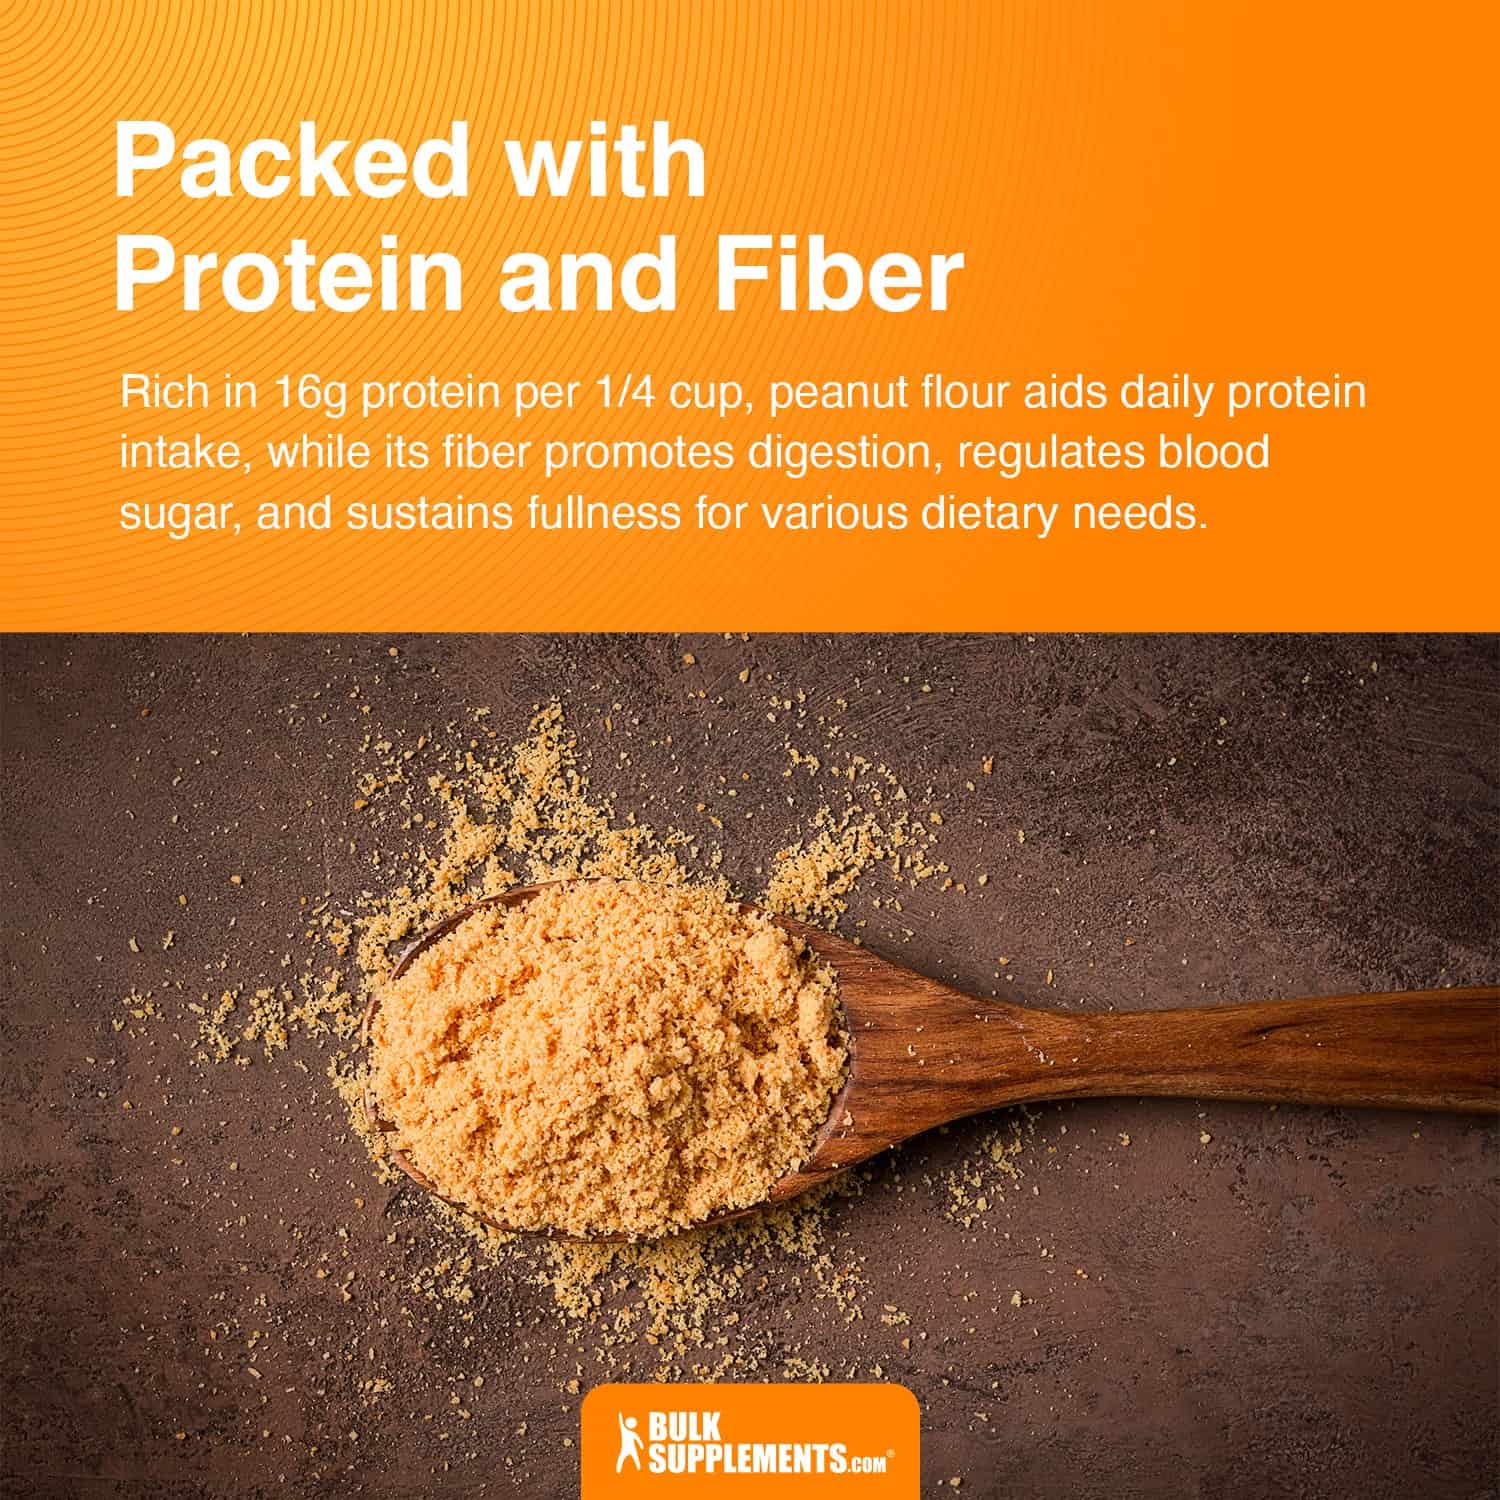 peanut flour packed with protein and fiber